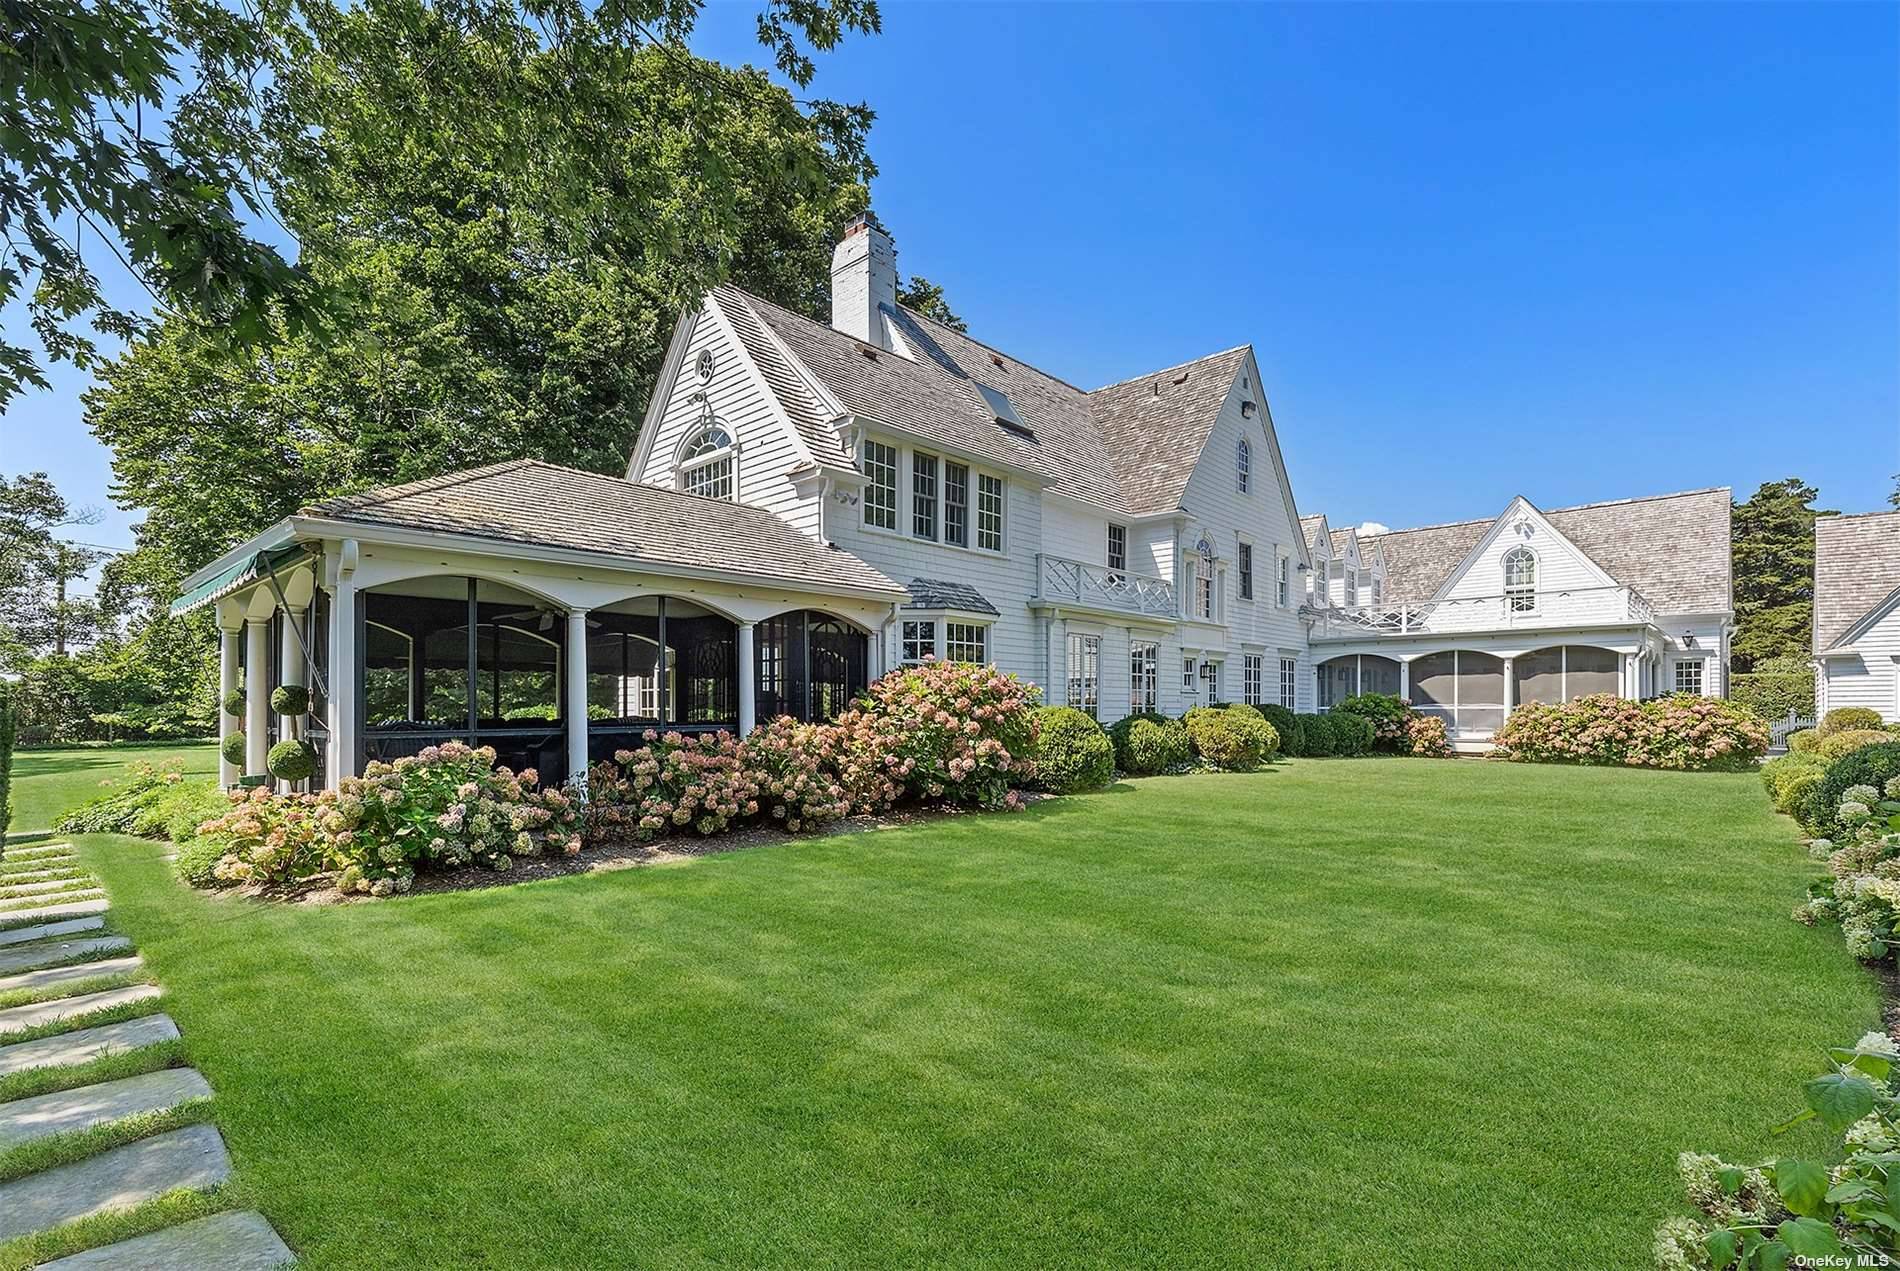 Tucked behind manicured hedges, this 9 bedrm hidden oasis known as Twelve Oaks is located in the heart of Westhampton Beach Village.